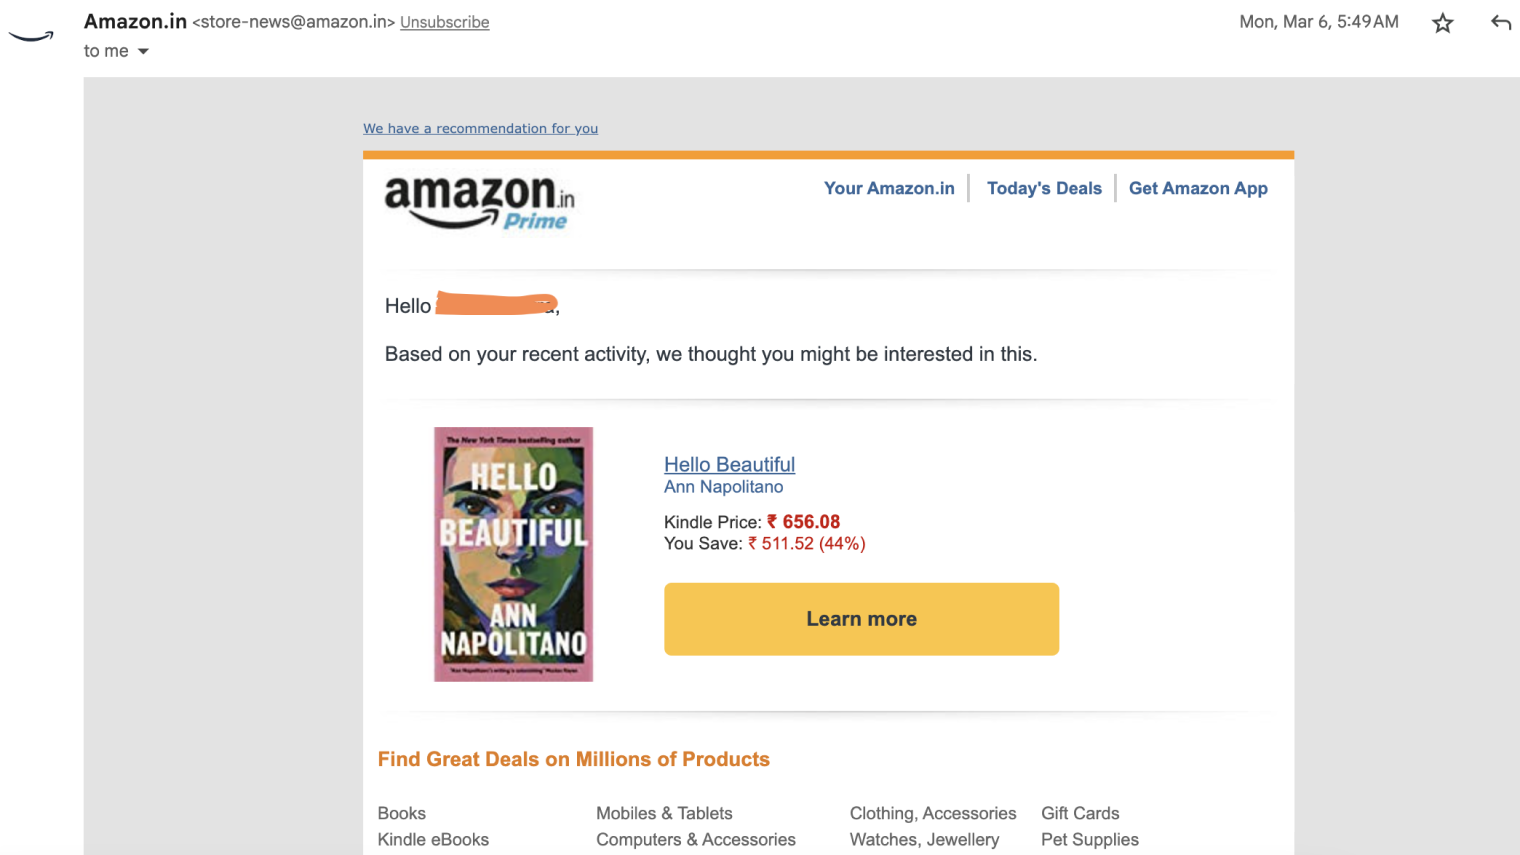 Personalize emails to nurture relationships and build trust - Amazon for email marketing